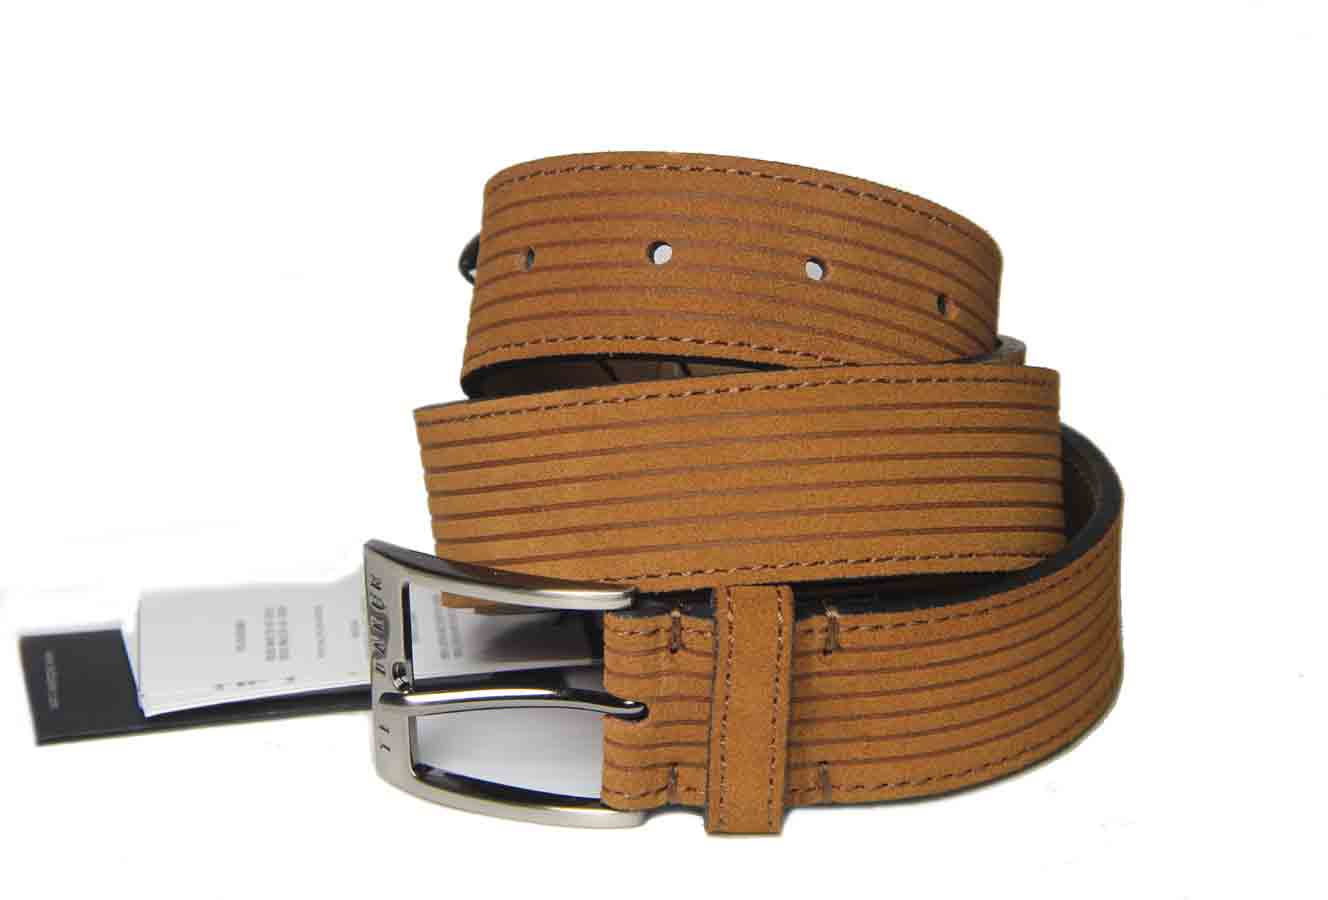 Ted Baker London Corduroy Leather Suede Belt Brown MADE IN ITALY Men's Size 34